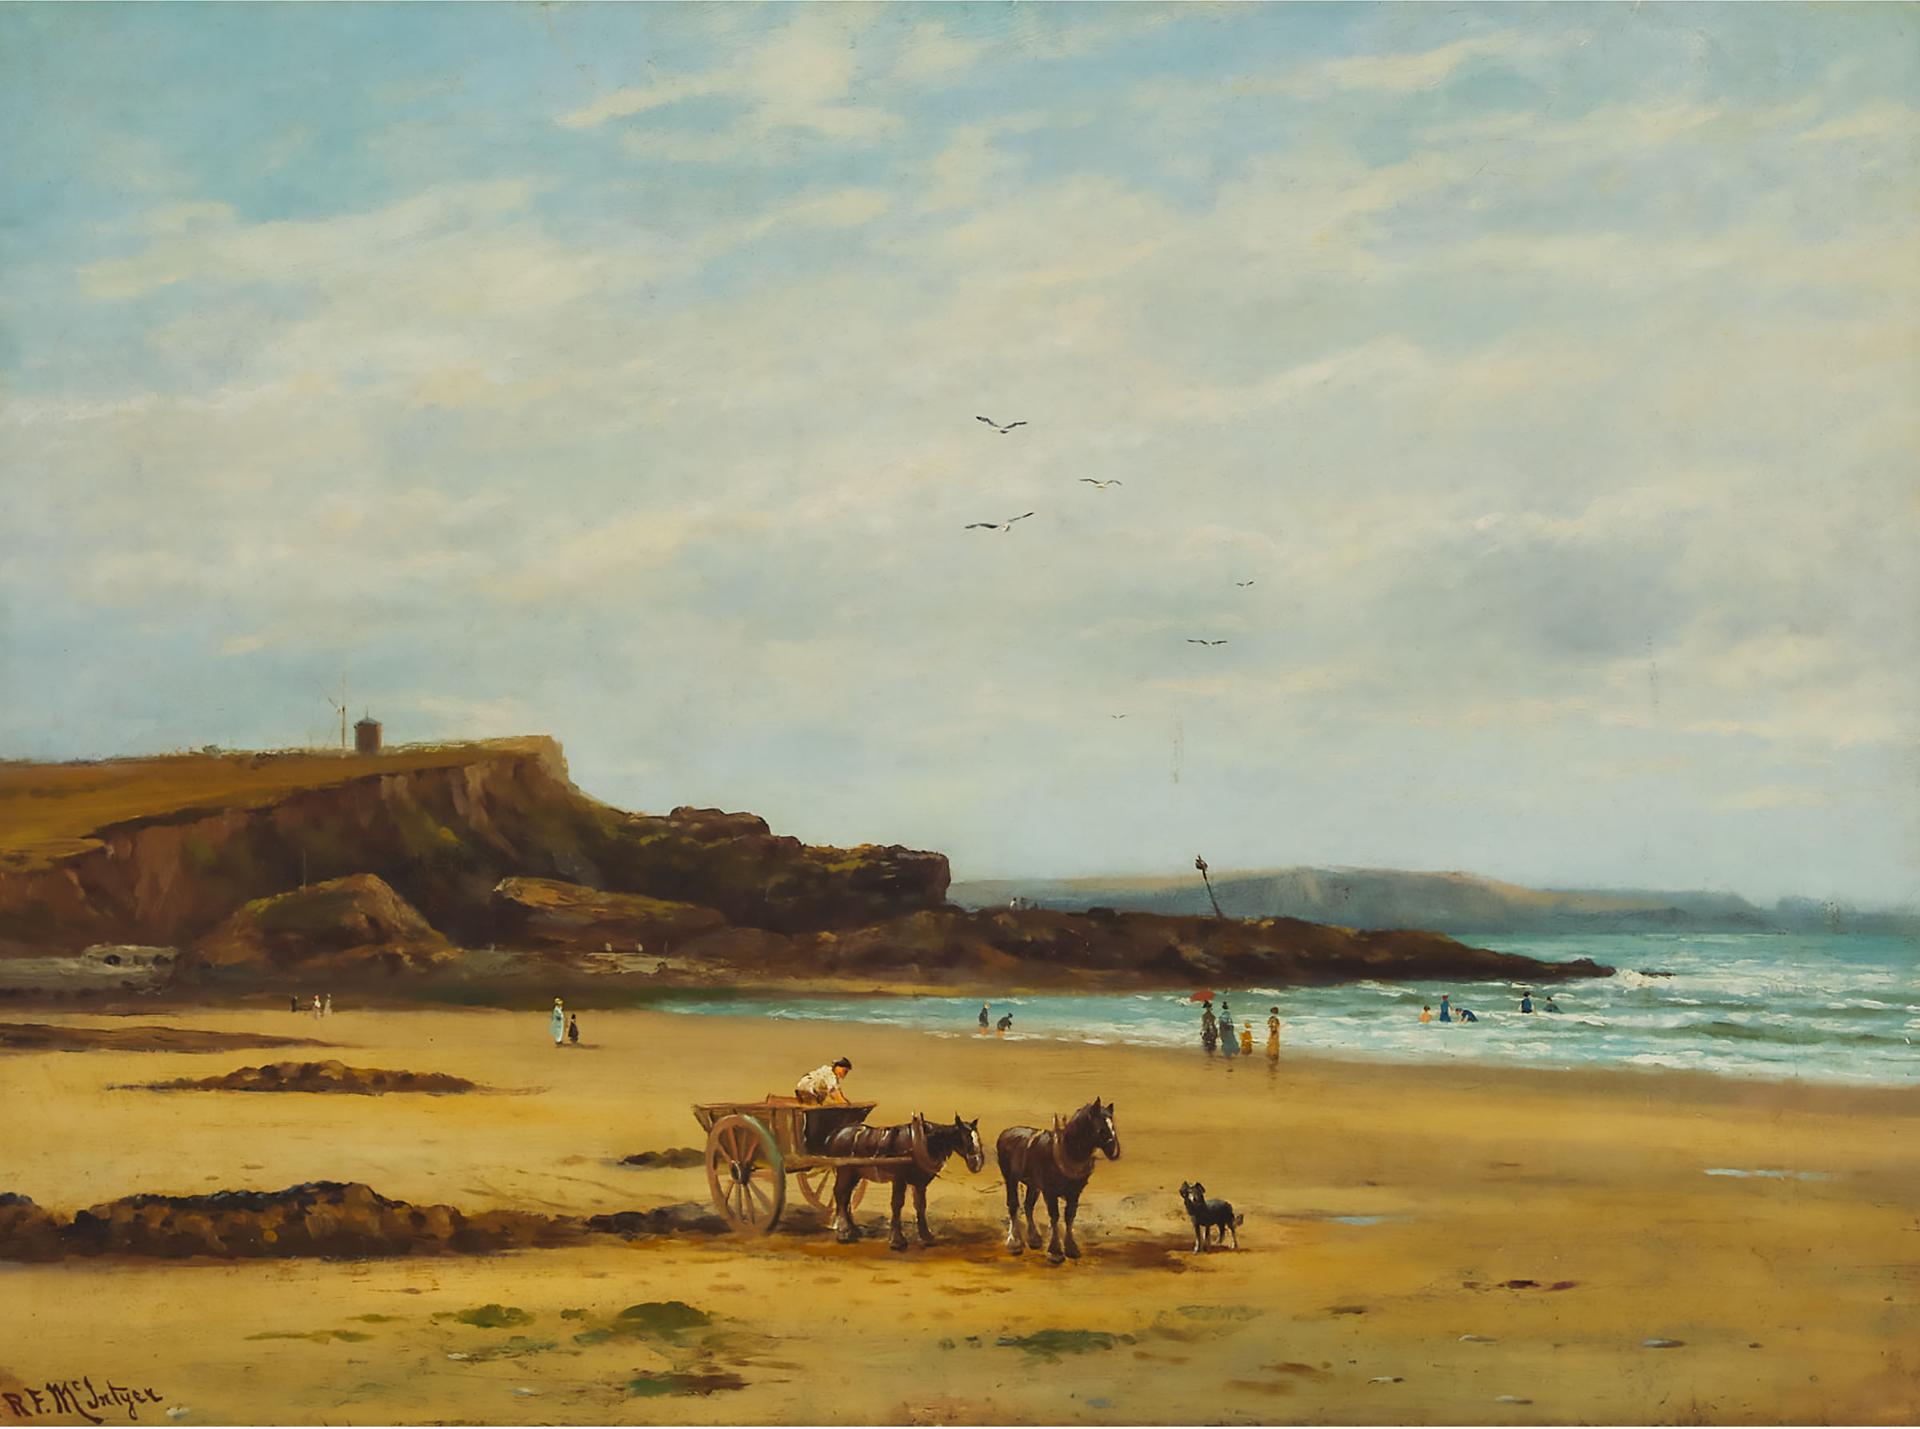 Robert Finlay McIntyre (1846-1906) - Horse And Cart By The Shore